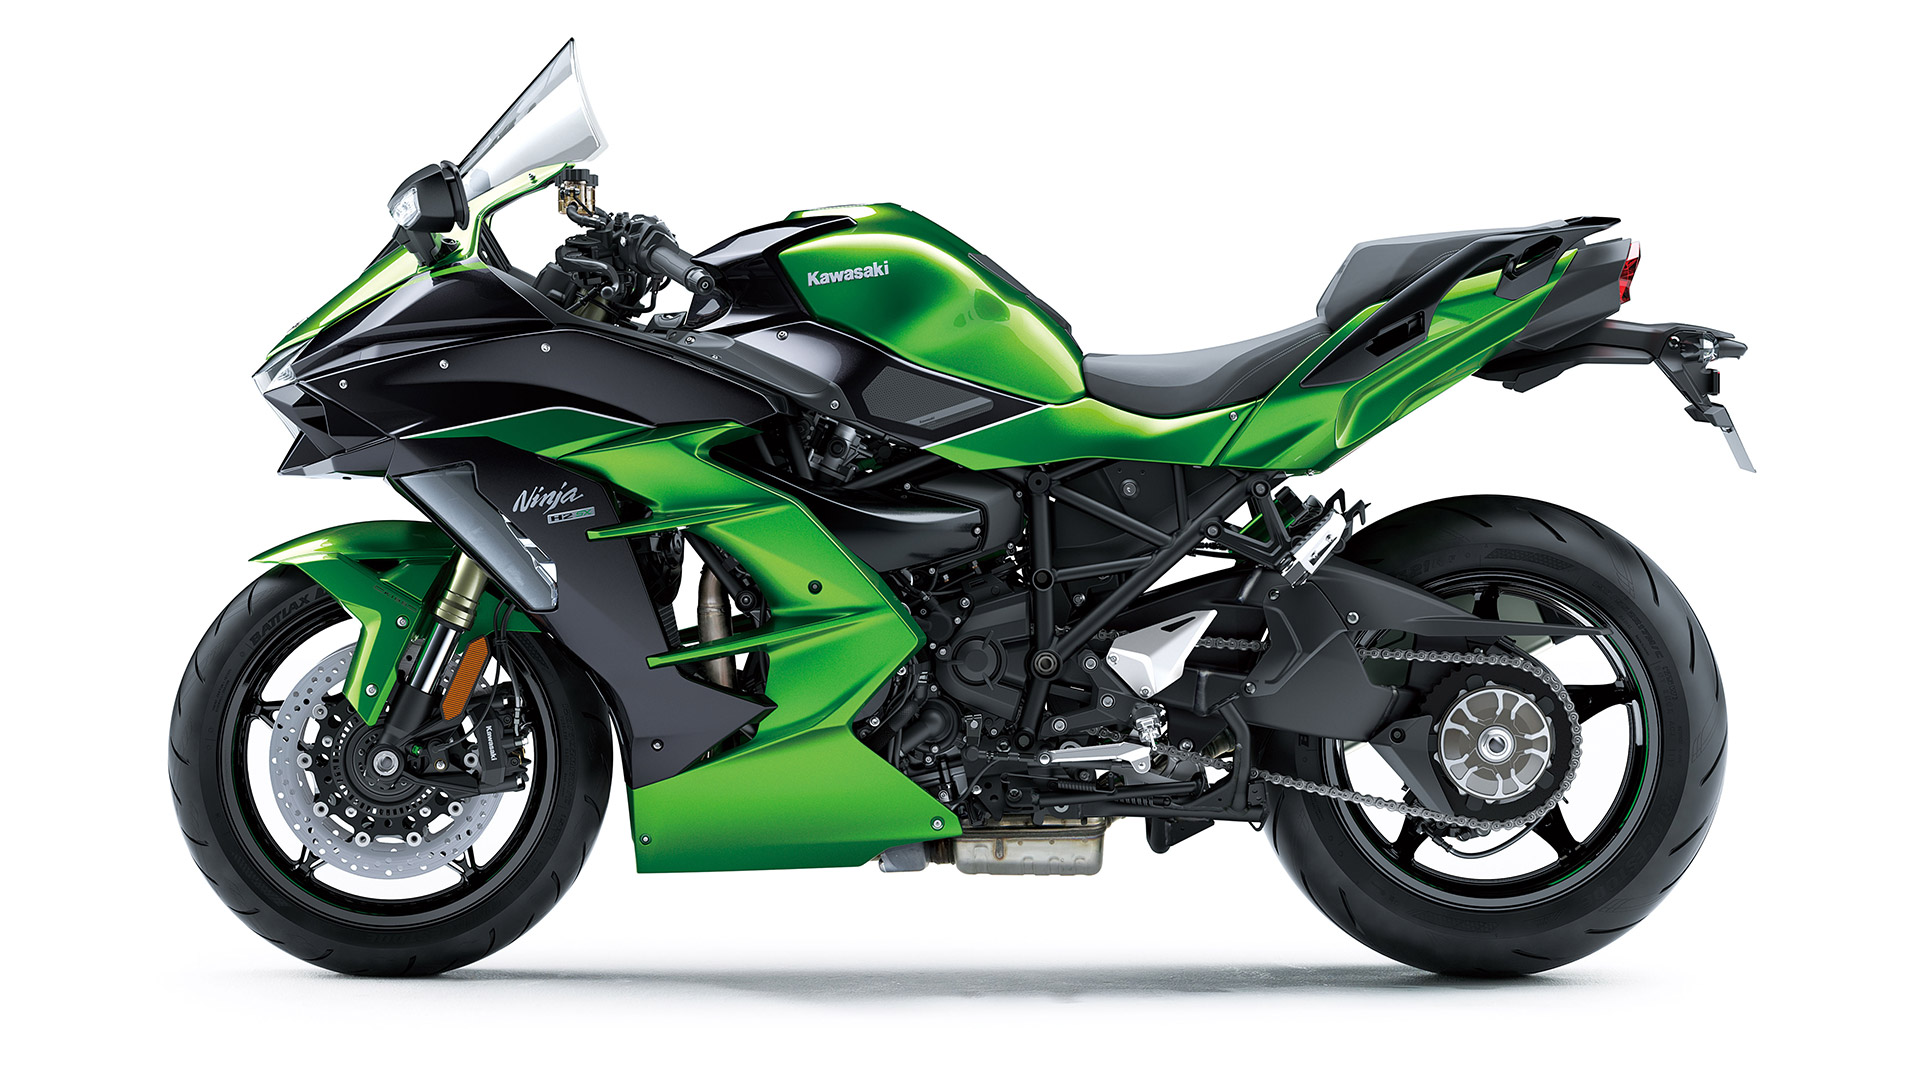 Kawasaki Ninja H2 Carbon - Price, Mileage, Reviews, Specification, Gallery - Overdrive